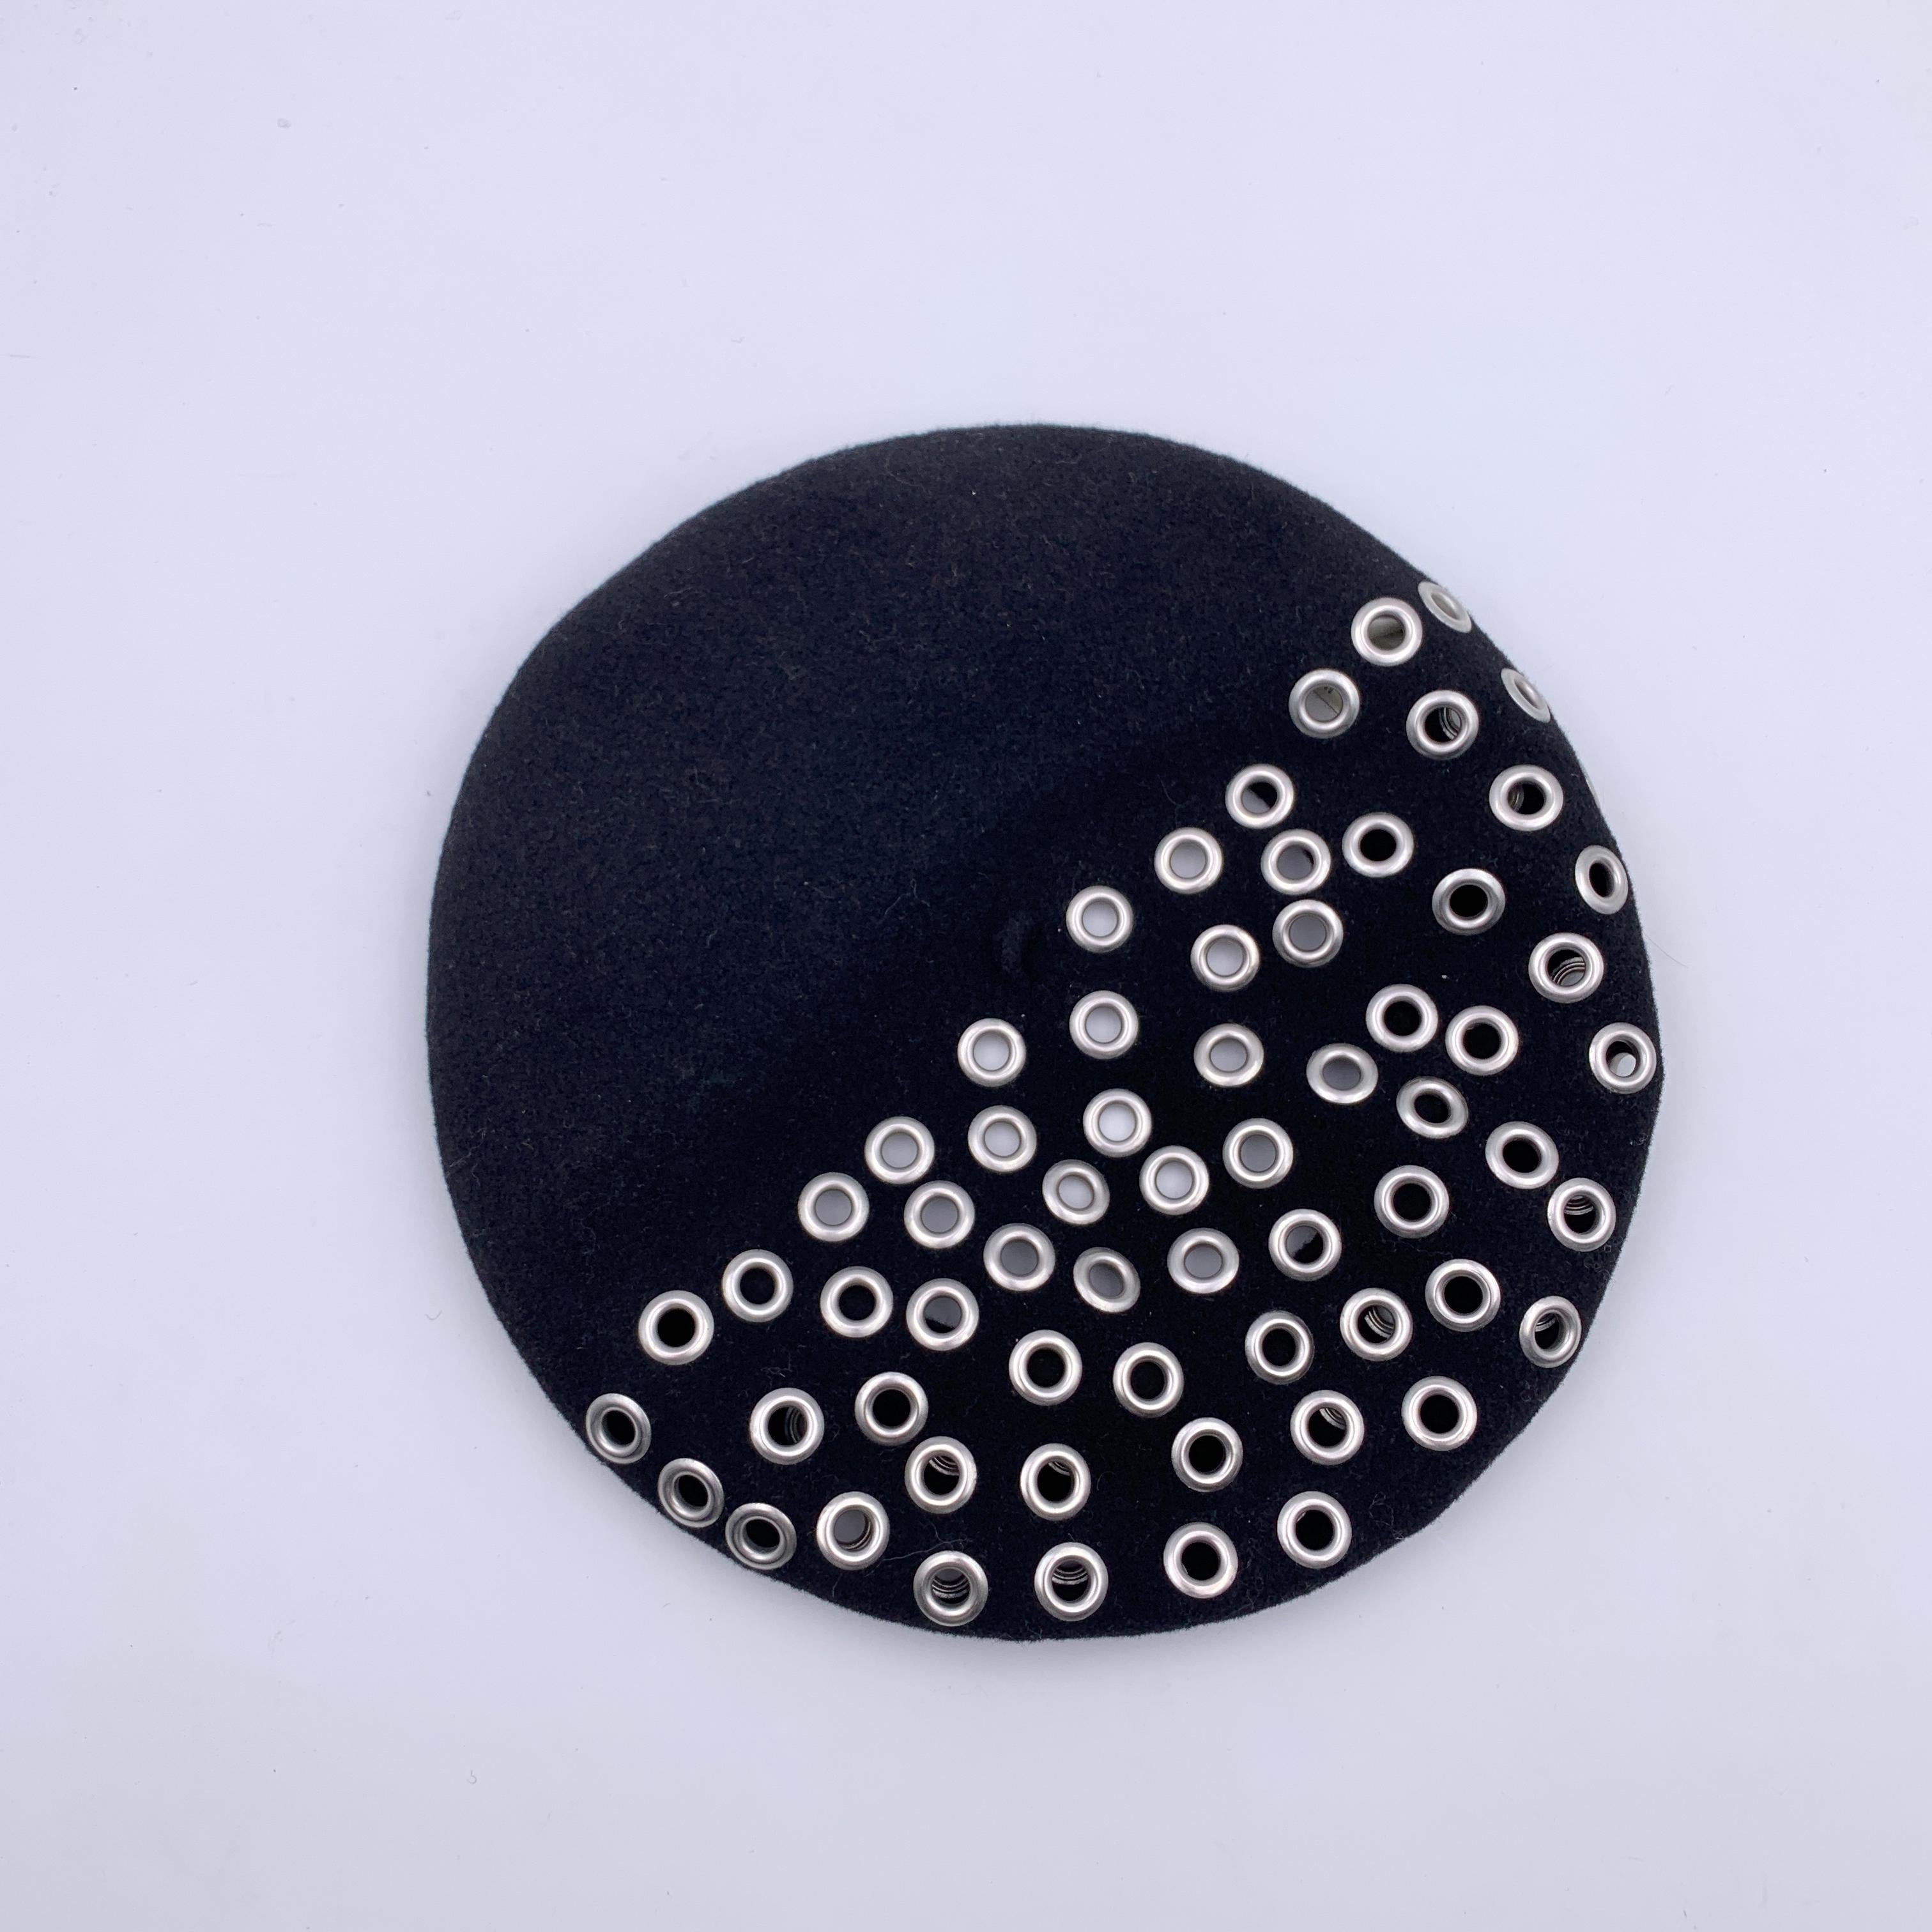 Black wool Christian Dior French beret hat with silver metal grommets detailing. Composition: 100% wool. One size Cotton trim inside. Opening diameter: 7 inches -17.8 cm. Christian Dior tag inside. Made in France

Details

MATERIAL: Wool

COLOR: